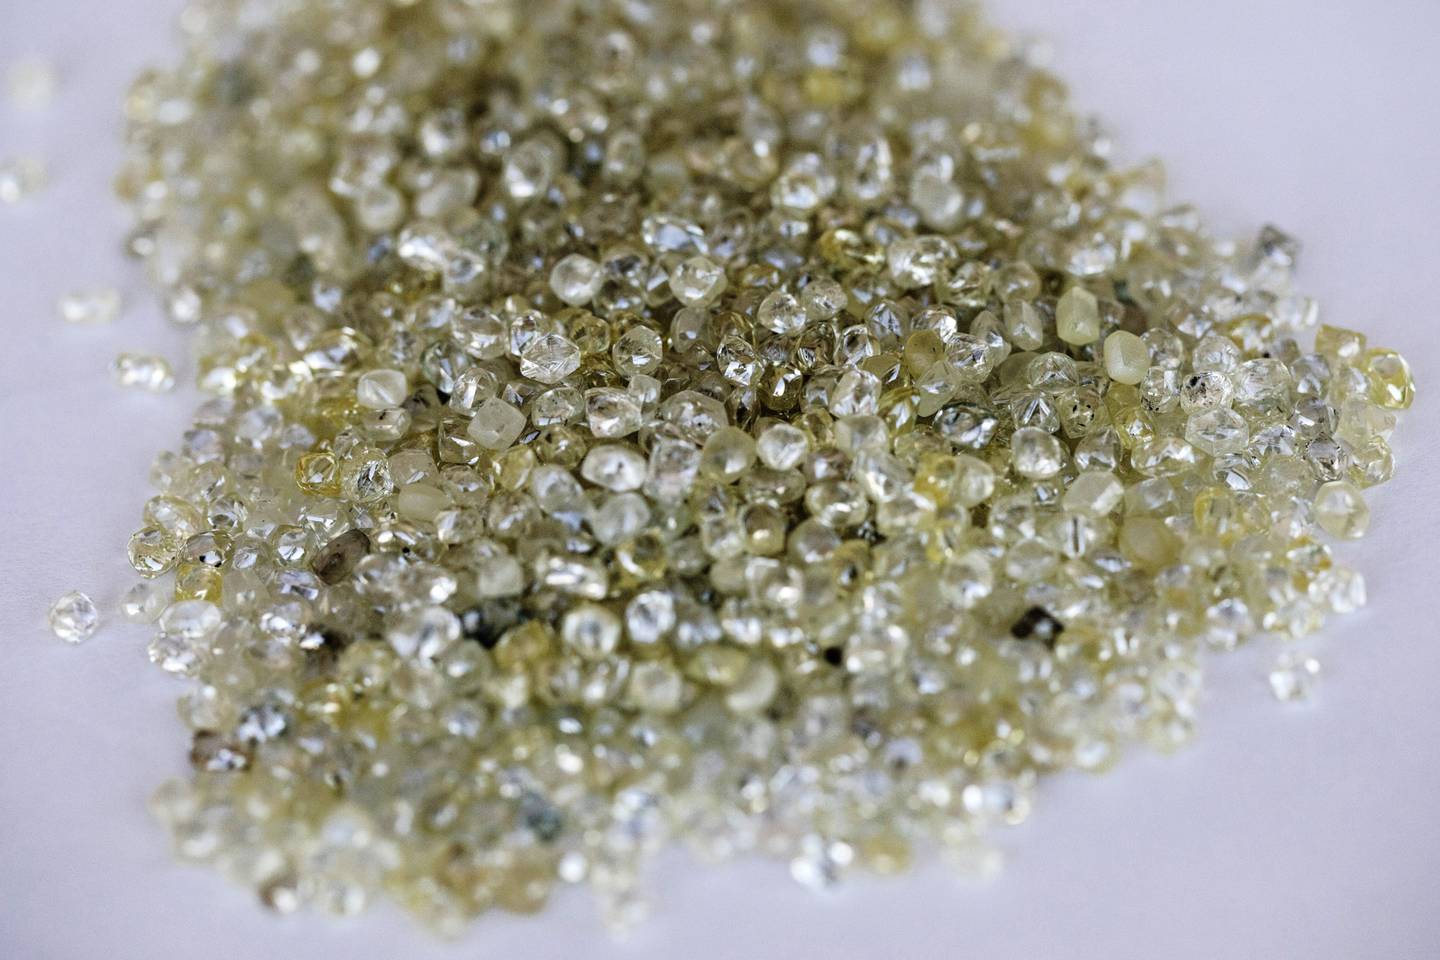 Rough diamonds sit on a sorting table at the Namibian Diamond Trading Co. (NTDC) diamond processing and valuation center, a joint venture between De Beers Group and Namdeb Diamond Corp. operated by Anglo American Plc, in Windhoek, Namibia, on Wednesday, June 14, 2017. The world's biggest diamond producer has spent $157 million on a state-of-the-art exploration vessel that will scour 6,000 square kilometers (2,300 square miles) of ocean floor for gems, an area about 65 percent bigger than Long Island. Photographer: Simon Dawson/Bloombergdfd